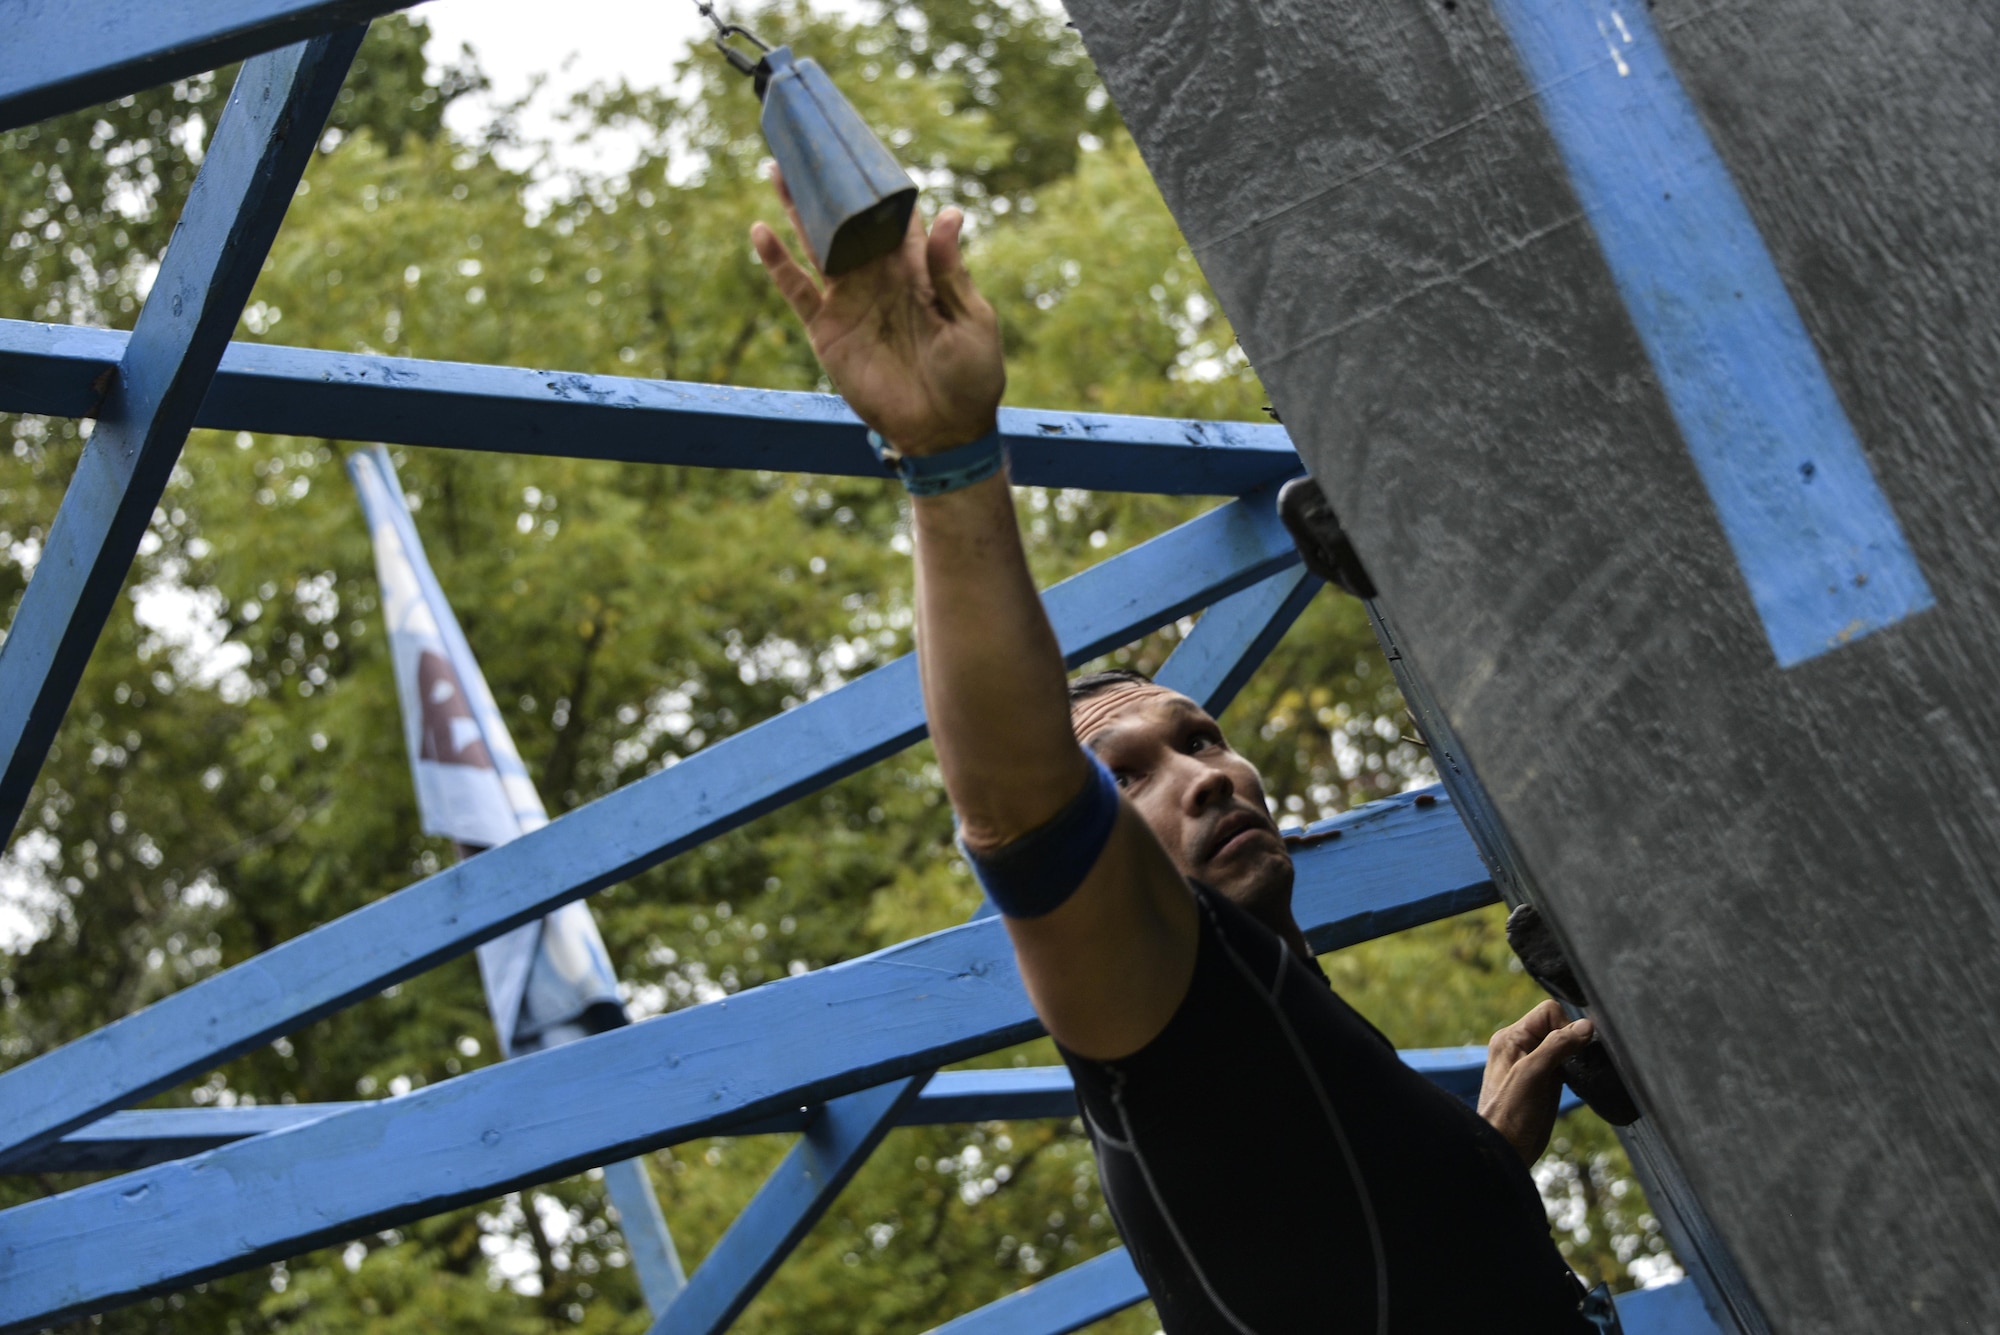 Col. Thomas Hensley, 70th Intelligence, Surveillance and Reconnaissance Wing commander, completes a rock climbing wall with only a one-inch gap along a 25-foot wall during the 2016 Savage Race October 8, 2016 at Kennedyville, Md. 70th ISRW participants endured a seven-mile obstacle course of cargo net walls, creeks, ice cold water and climbing to test their stamina and strength as a team. (U.S. Air Force photo/Staff Sgt. Alexandre Montes)